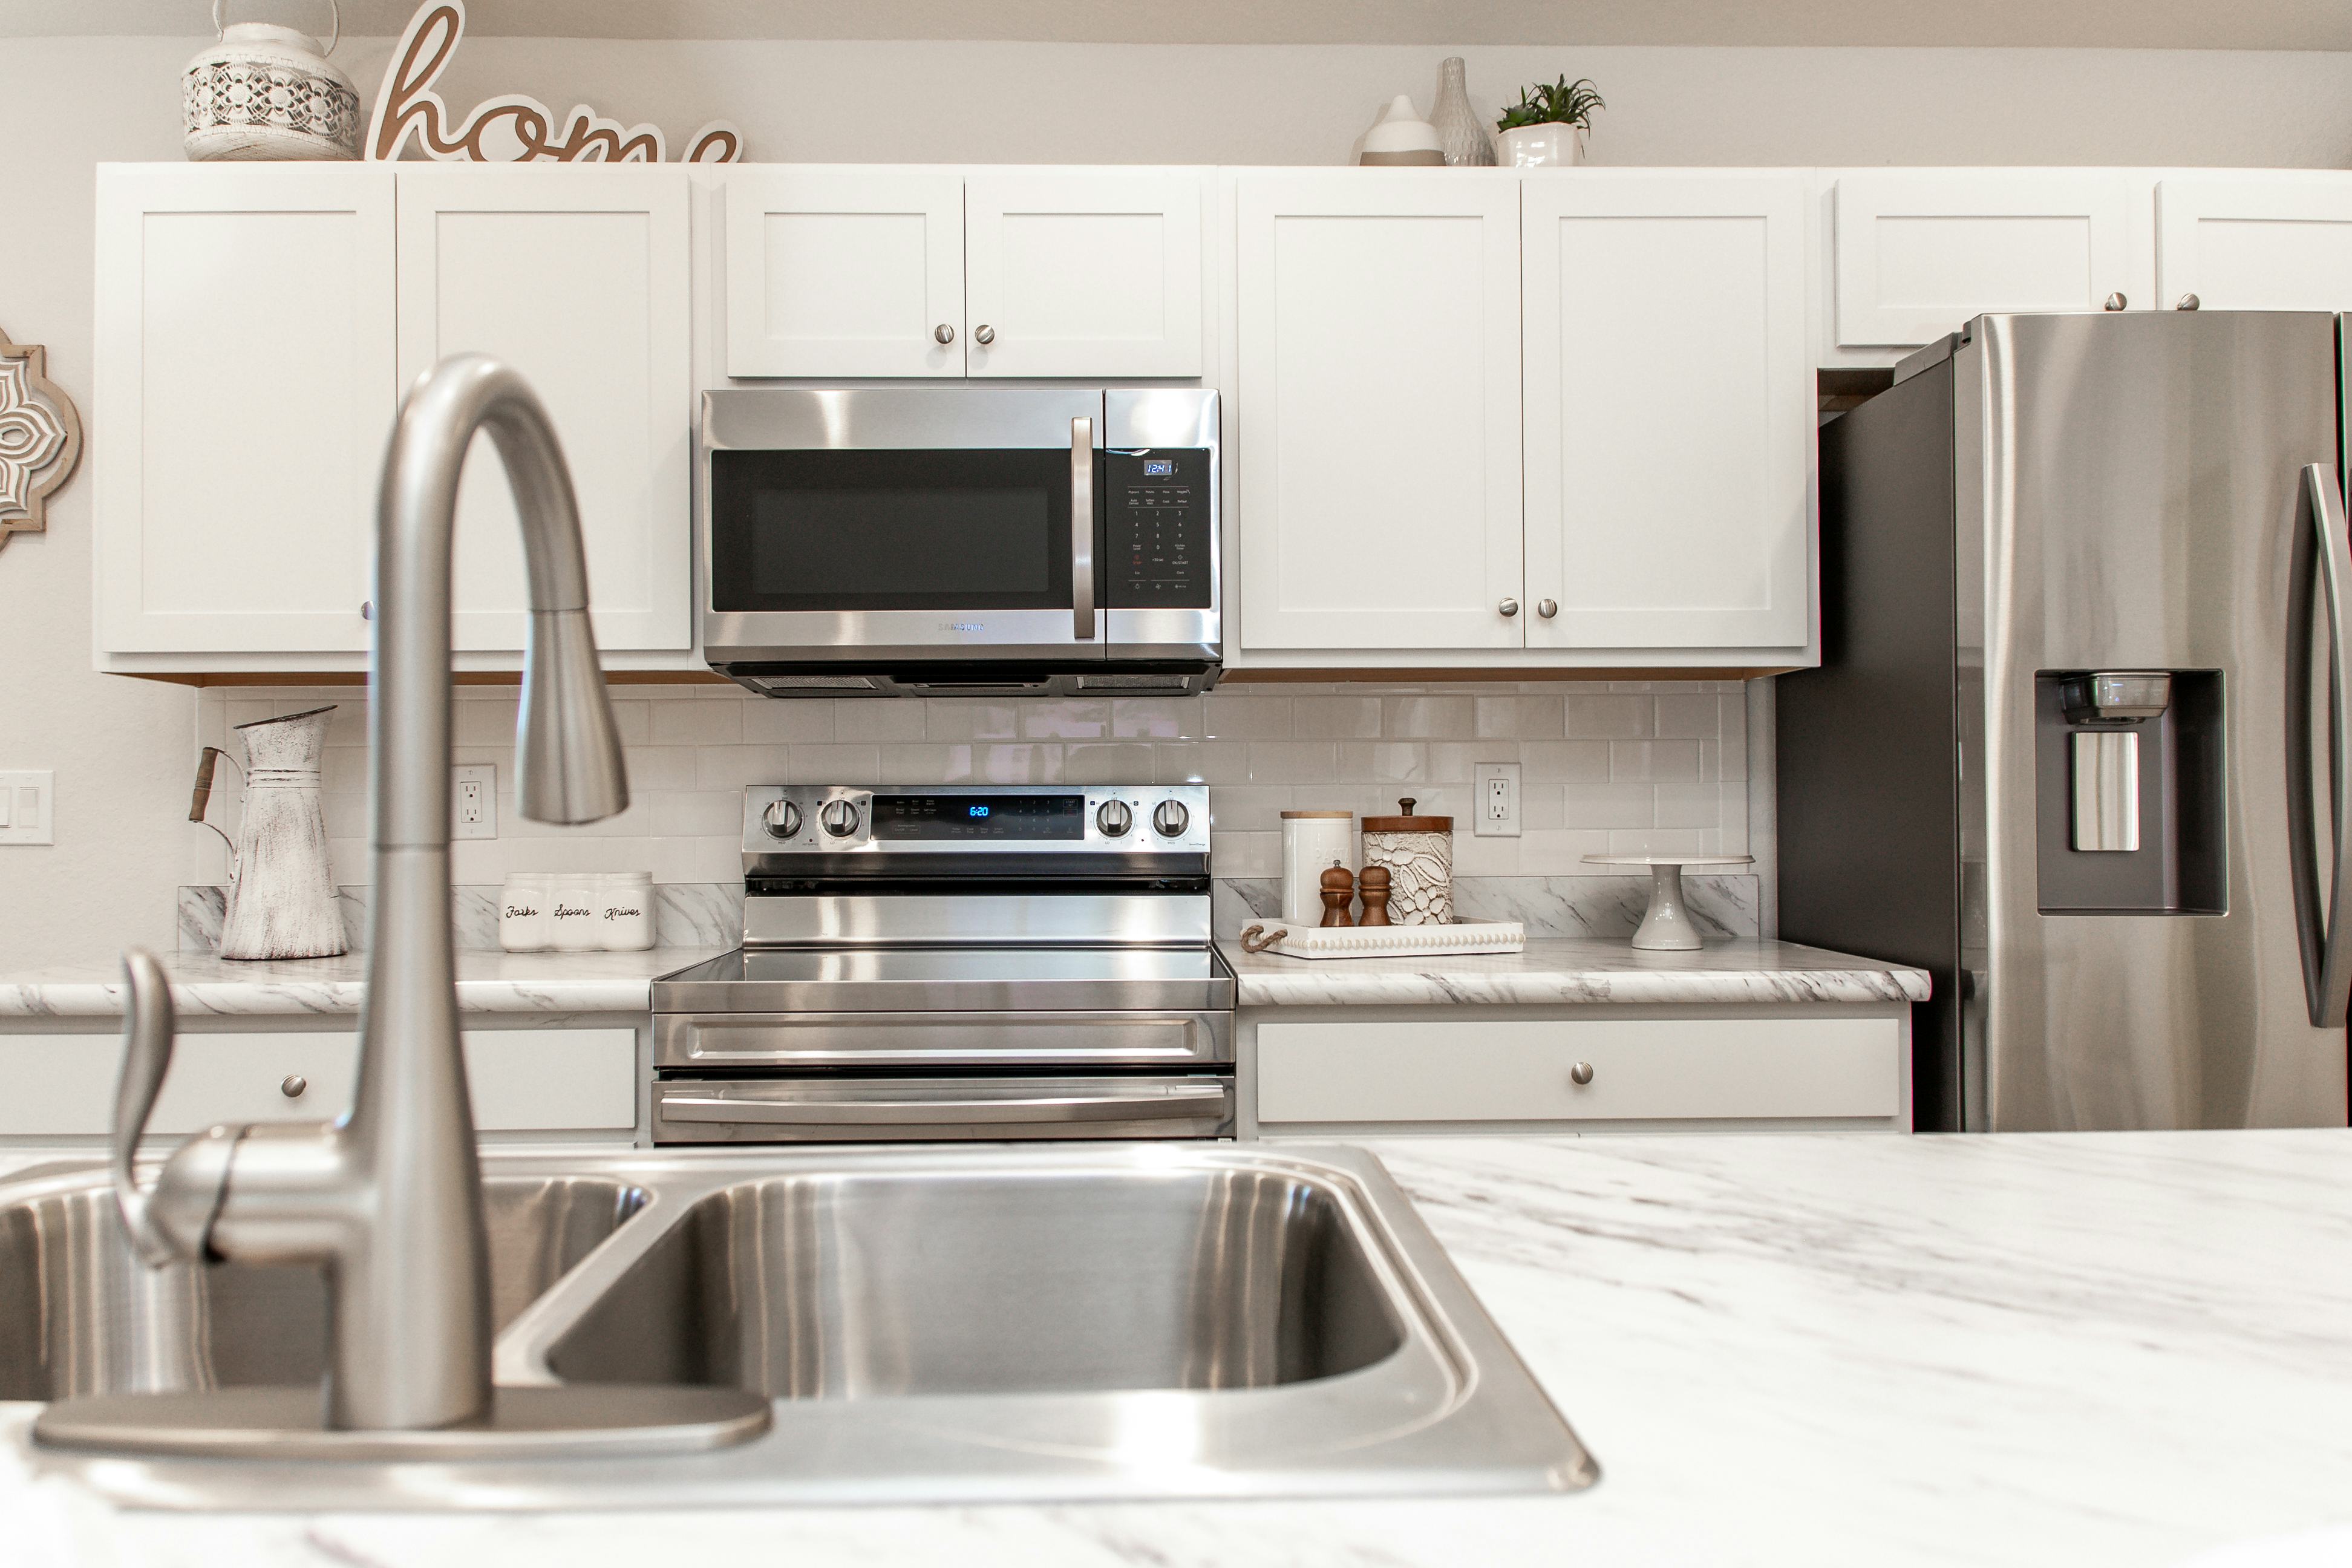 Highland Homes includes Samsung appliances in every Florida new home